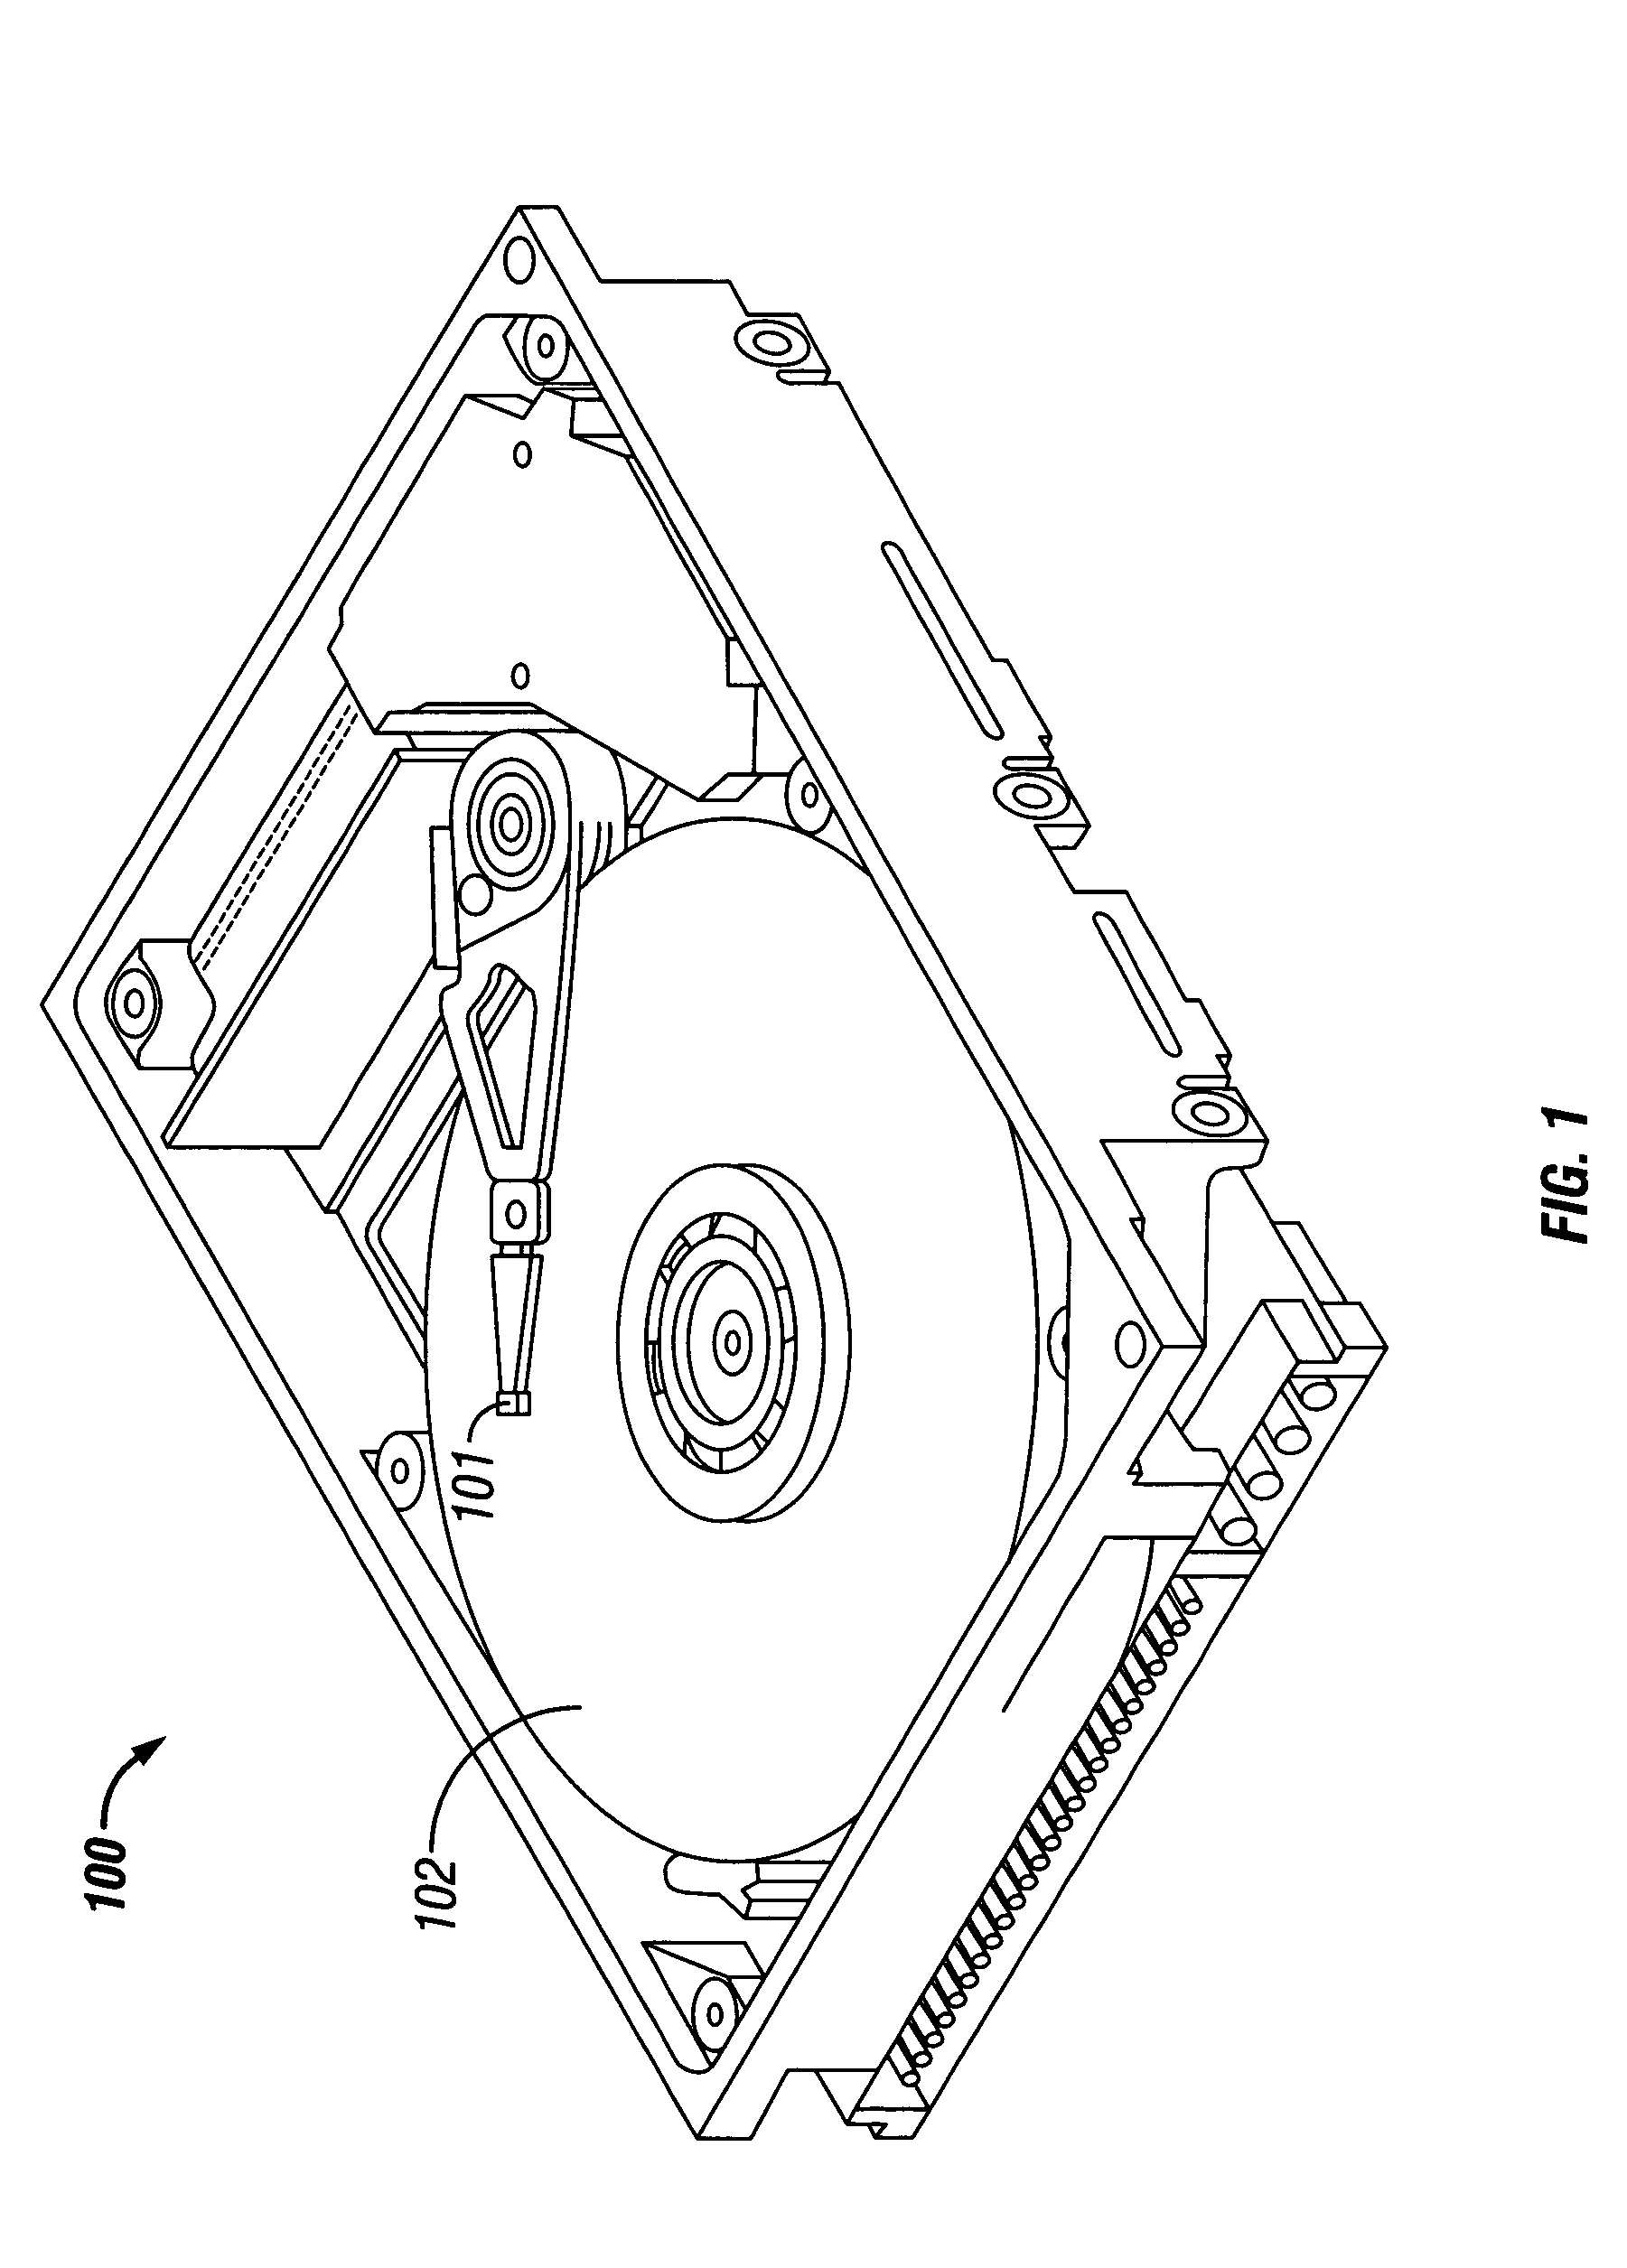 Disk drive with head-disk interaction sensor integrated with suspension